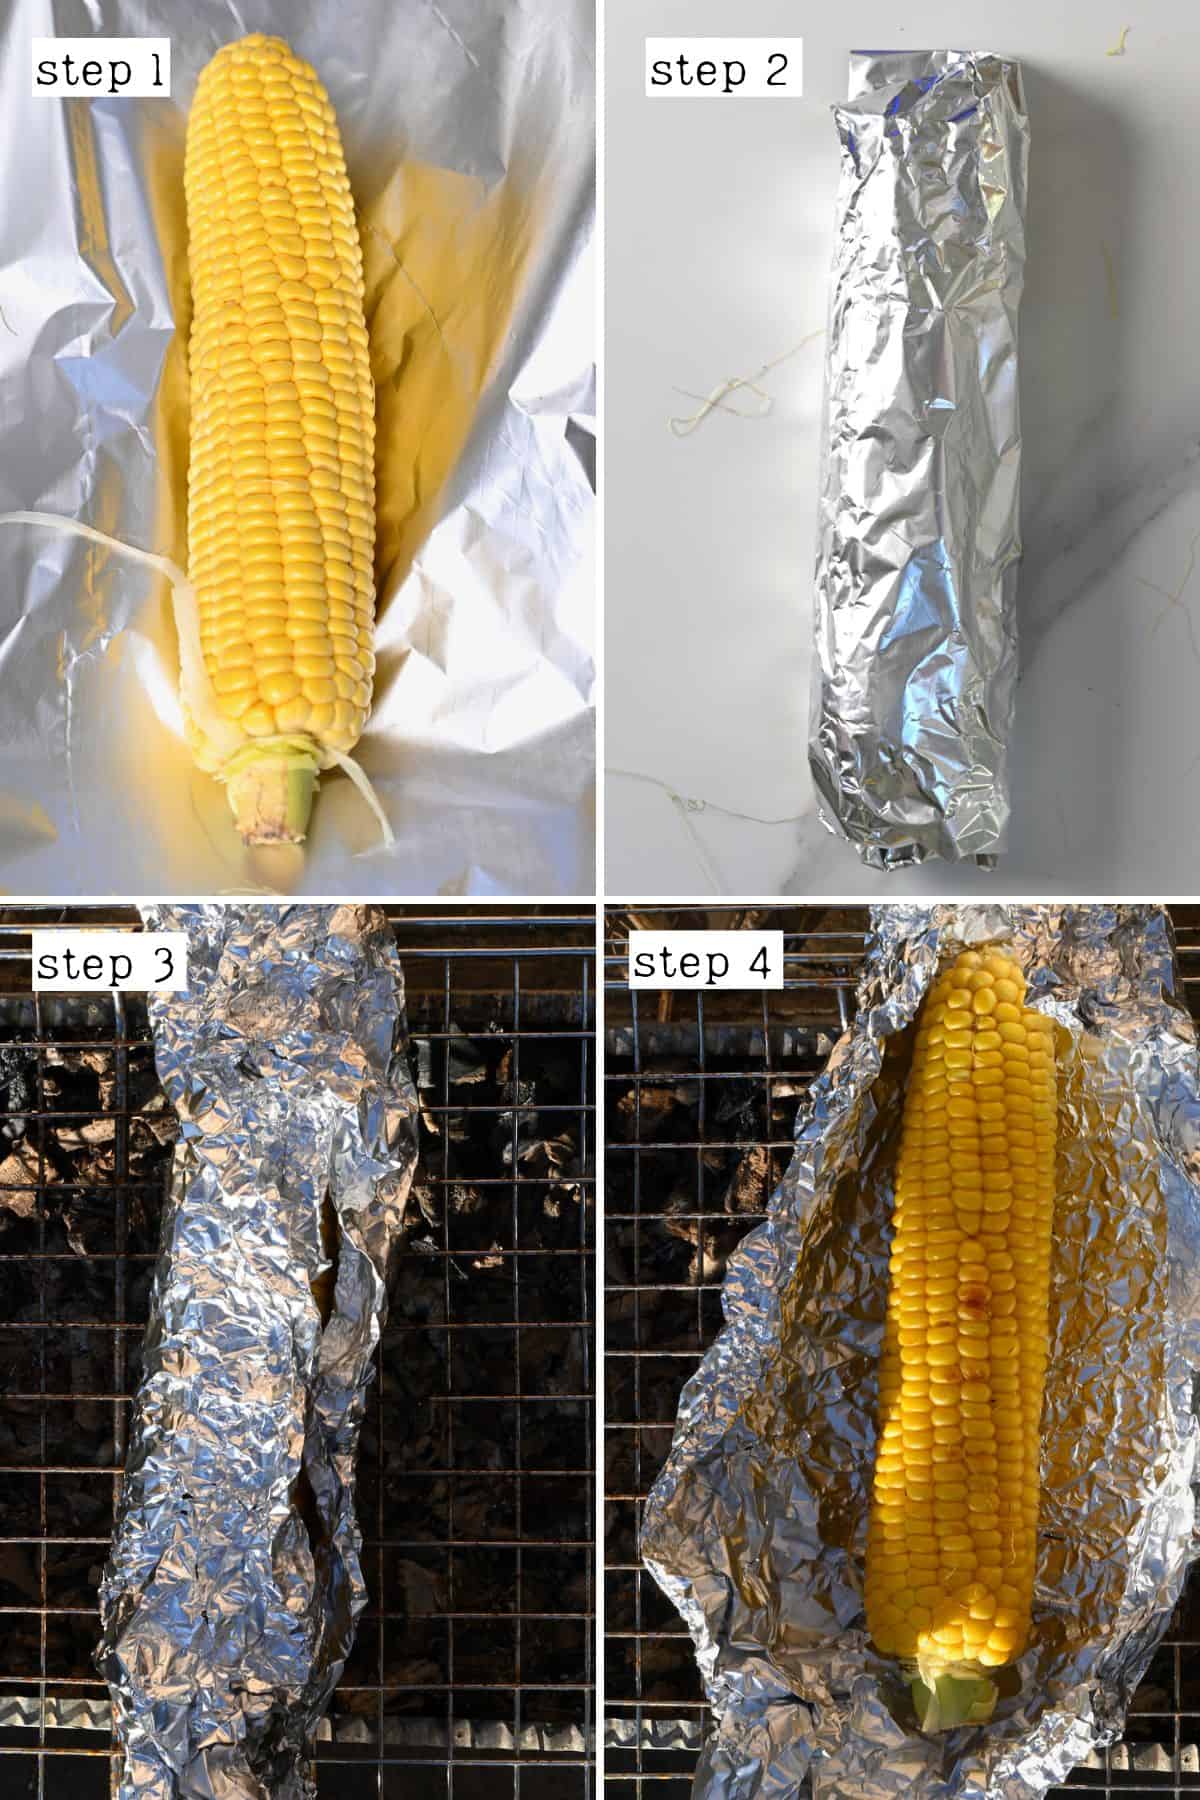 Steps for grilling corn on the cob in foil